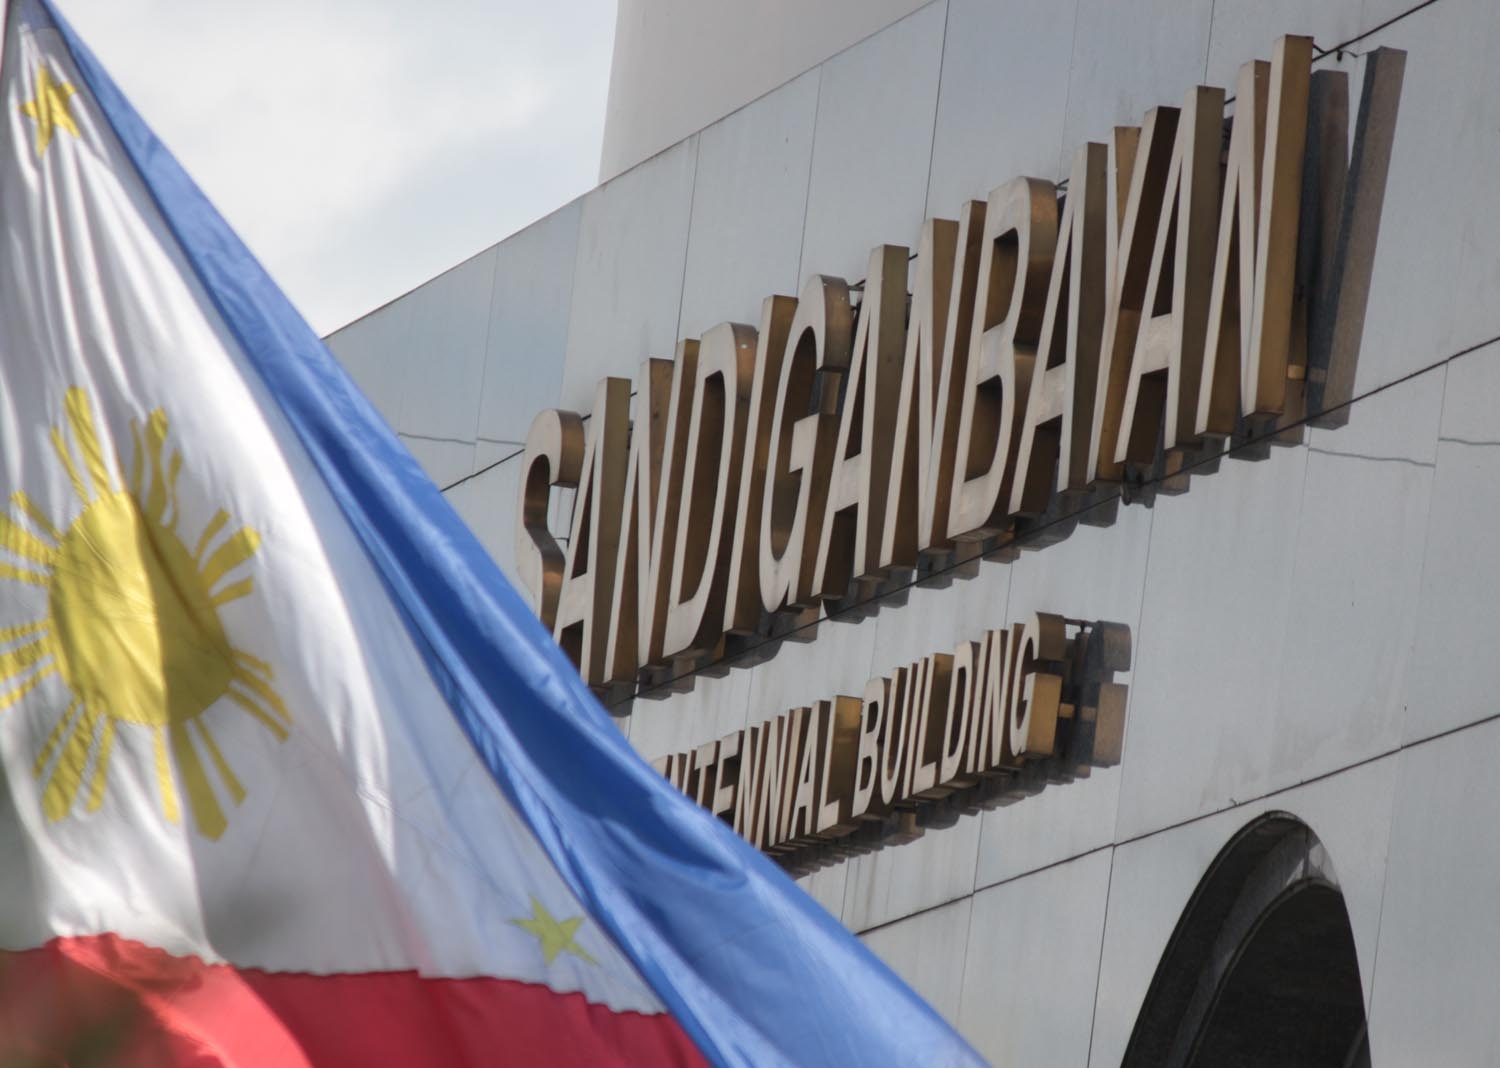 Sandiganbayan drops late Marcos crony from P102-B civil suit